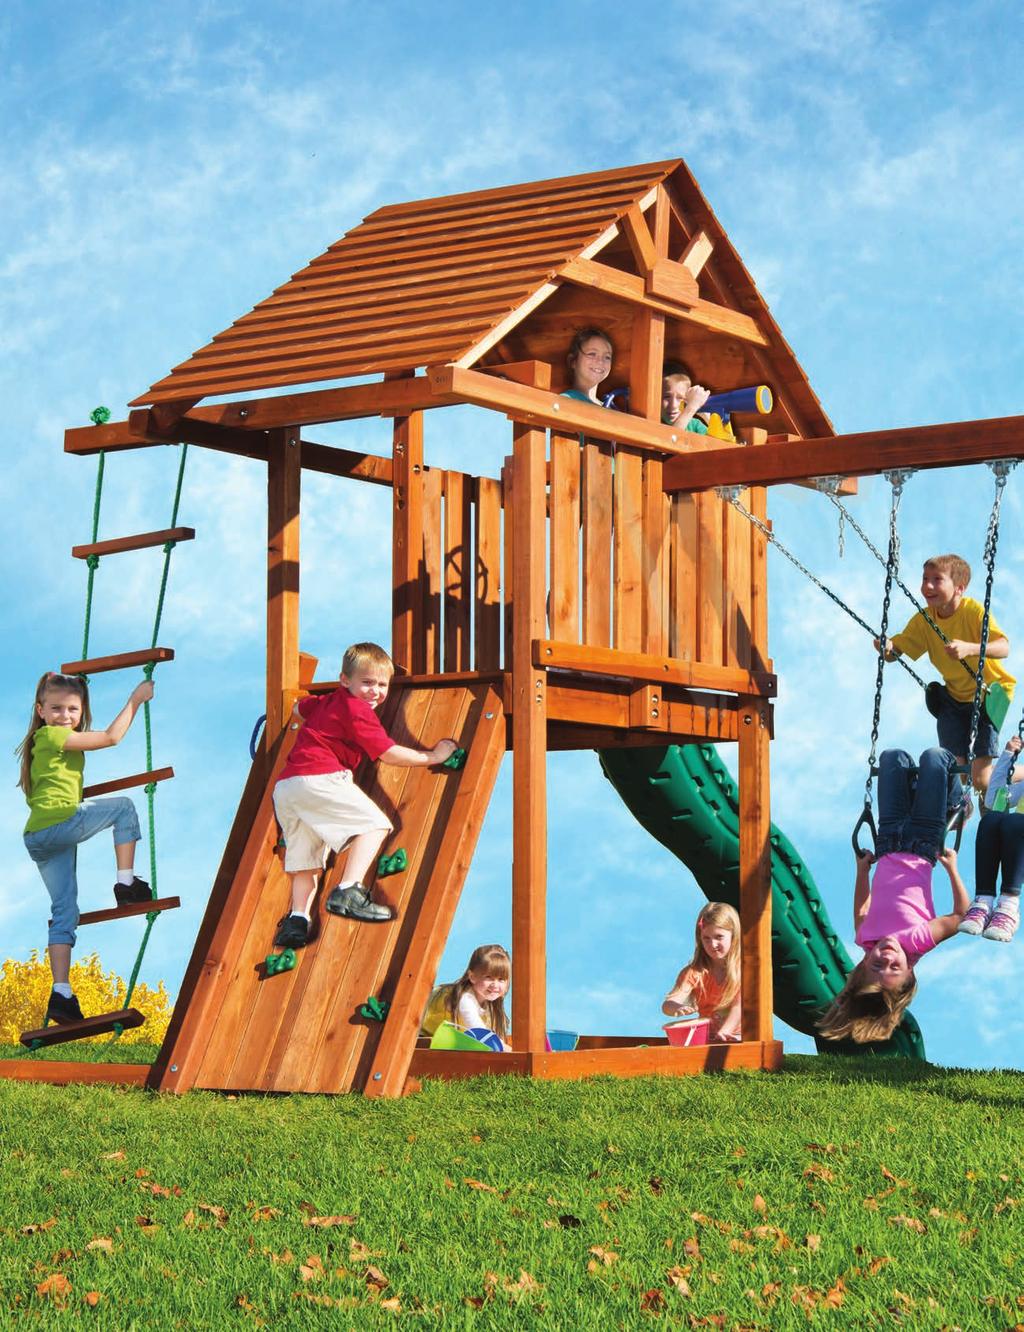 Our swing sets will stand the test of time and deliver years of healthy, imaginative play for your children or grandchildren! Why PlayNation?